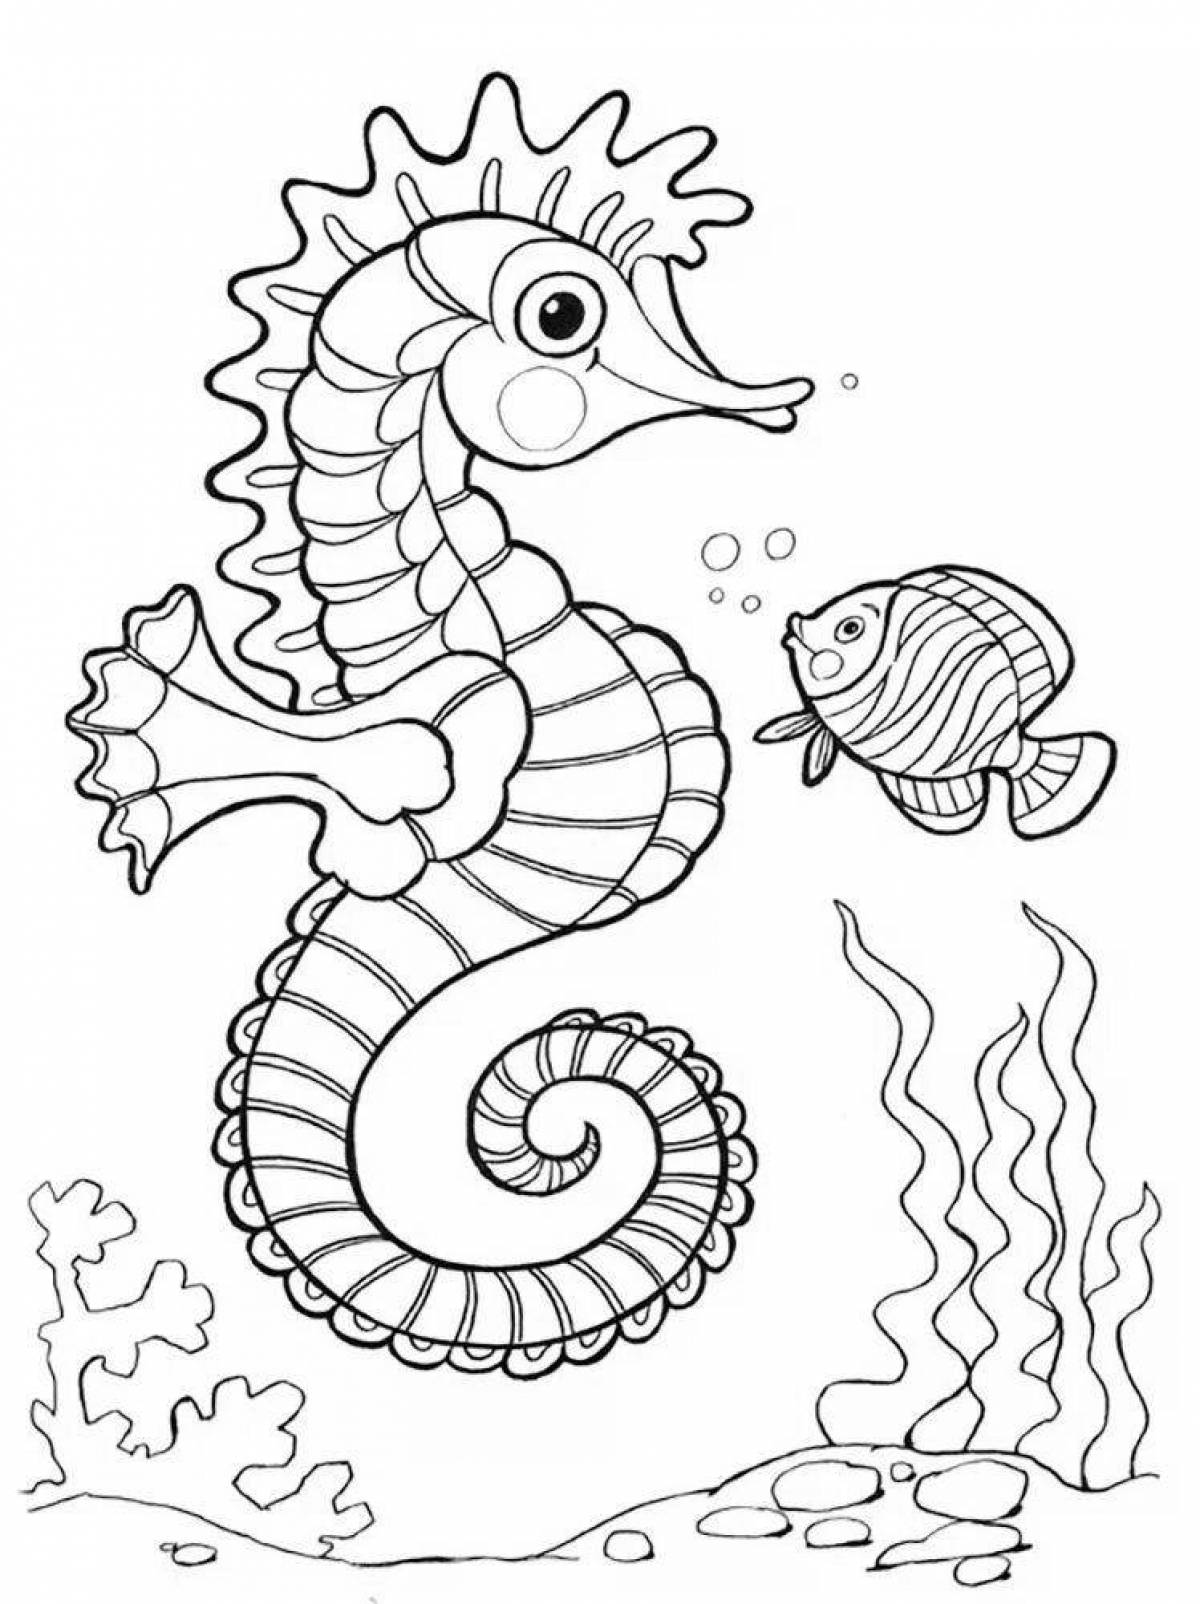 Wonderful sea life coloring book for children 5-6 years old